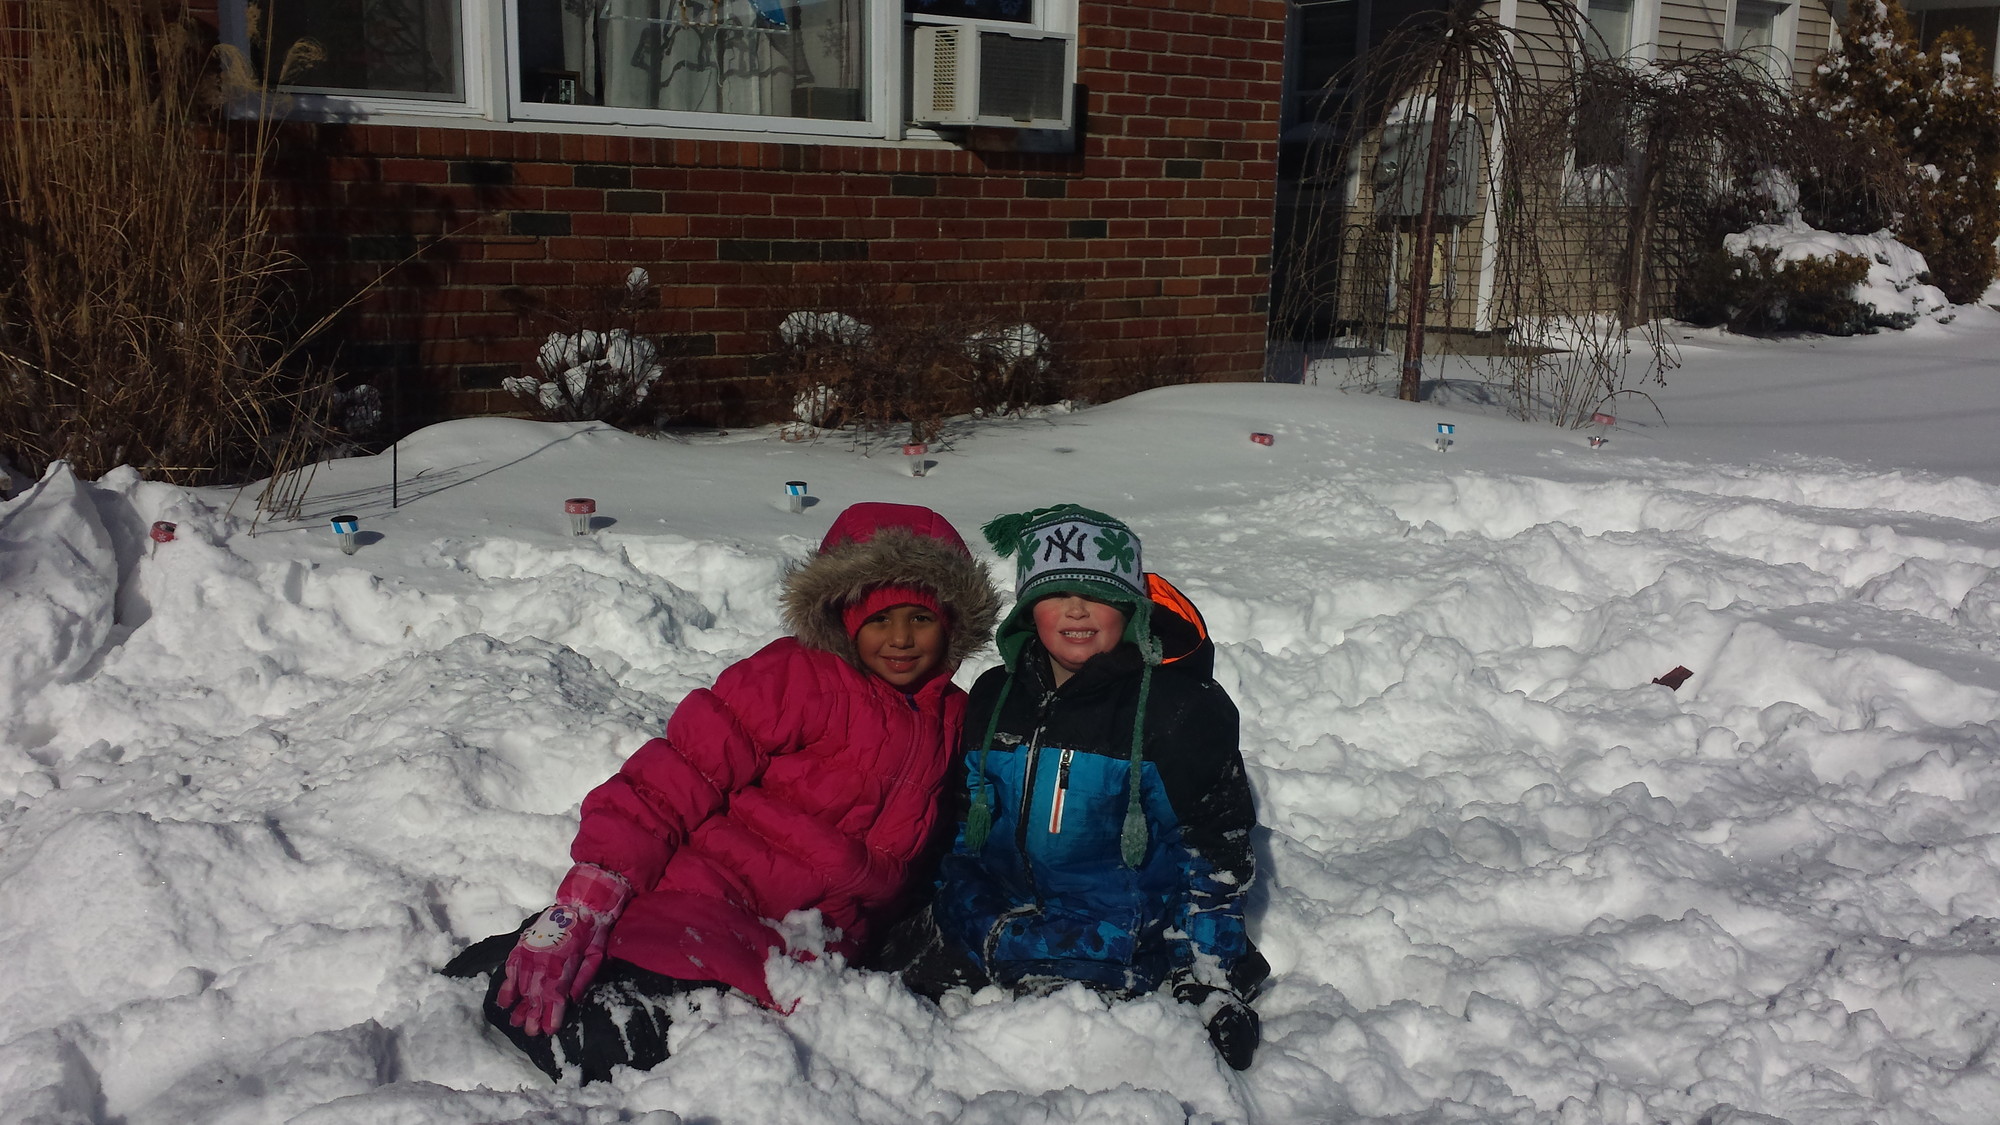 Bella Rush and Danny Casey enjoyed the snow outside of a Fifth Street home in Valley Stream on Wednesday.